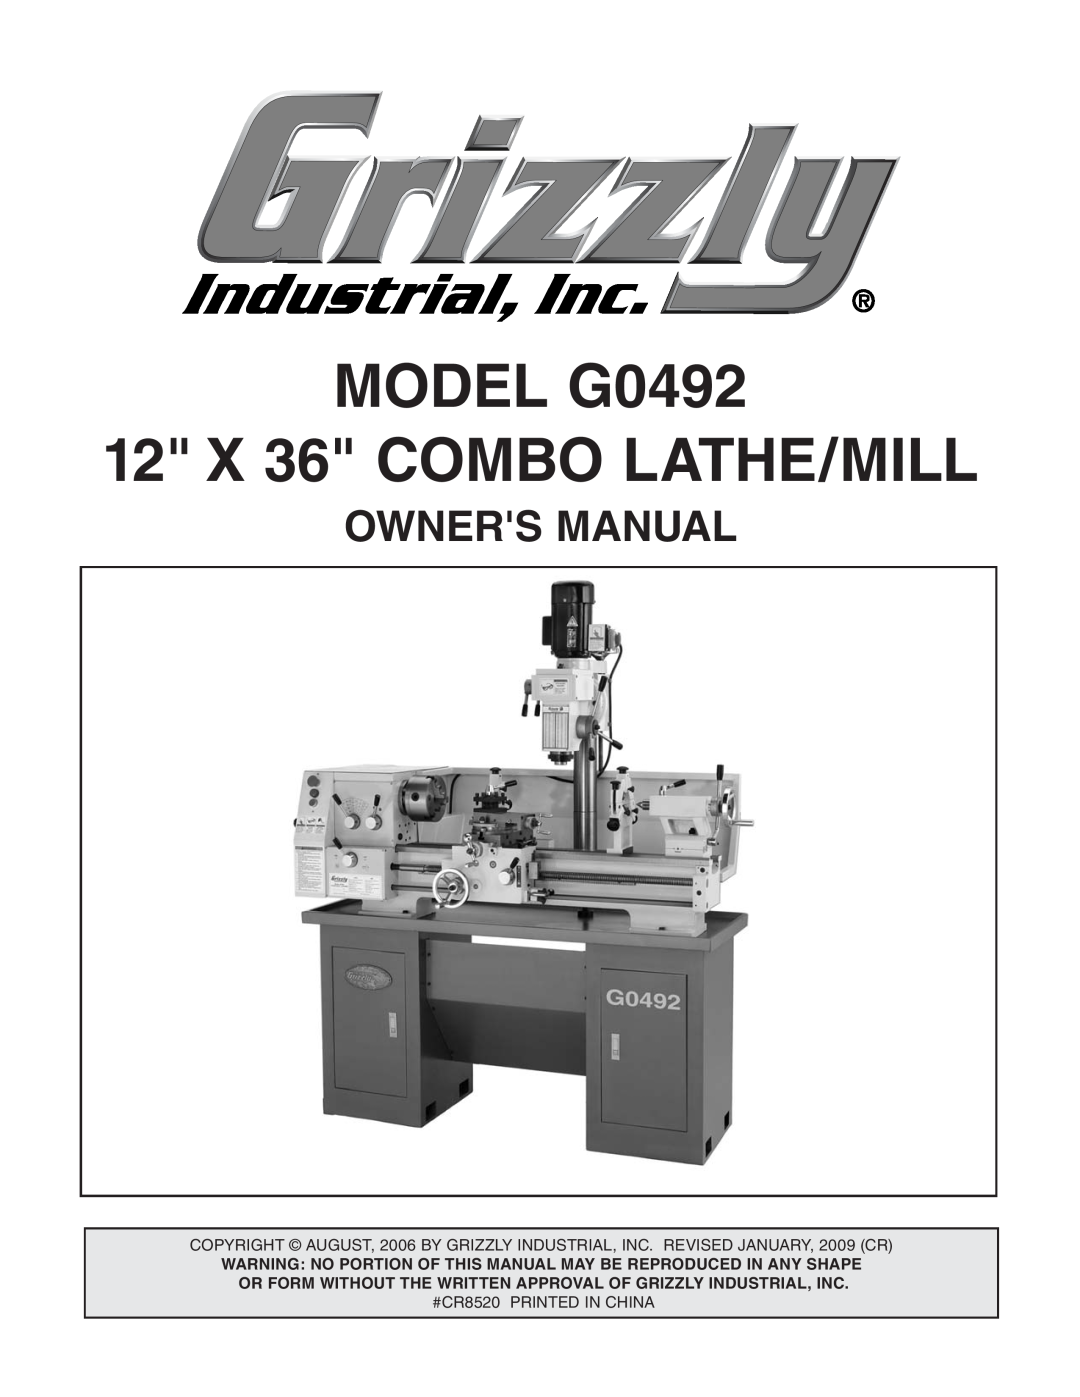 Grizzly manual MODEL G0492 12 X 36 COMBO LATHE/MILL 